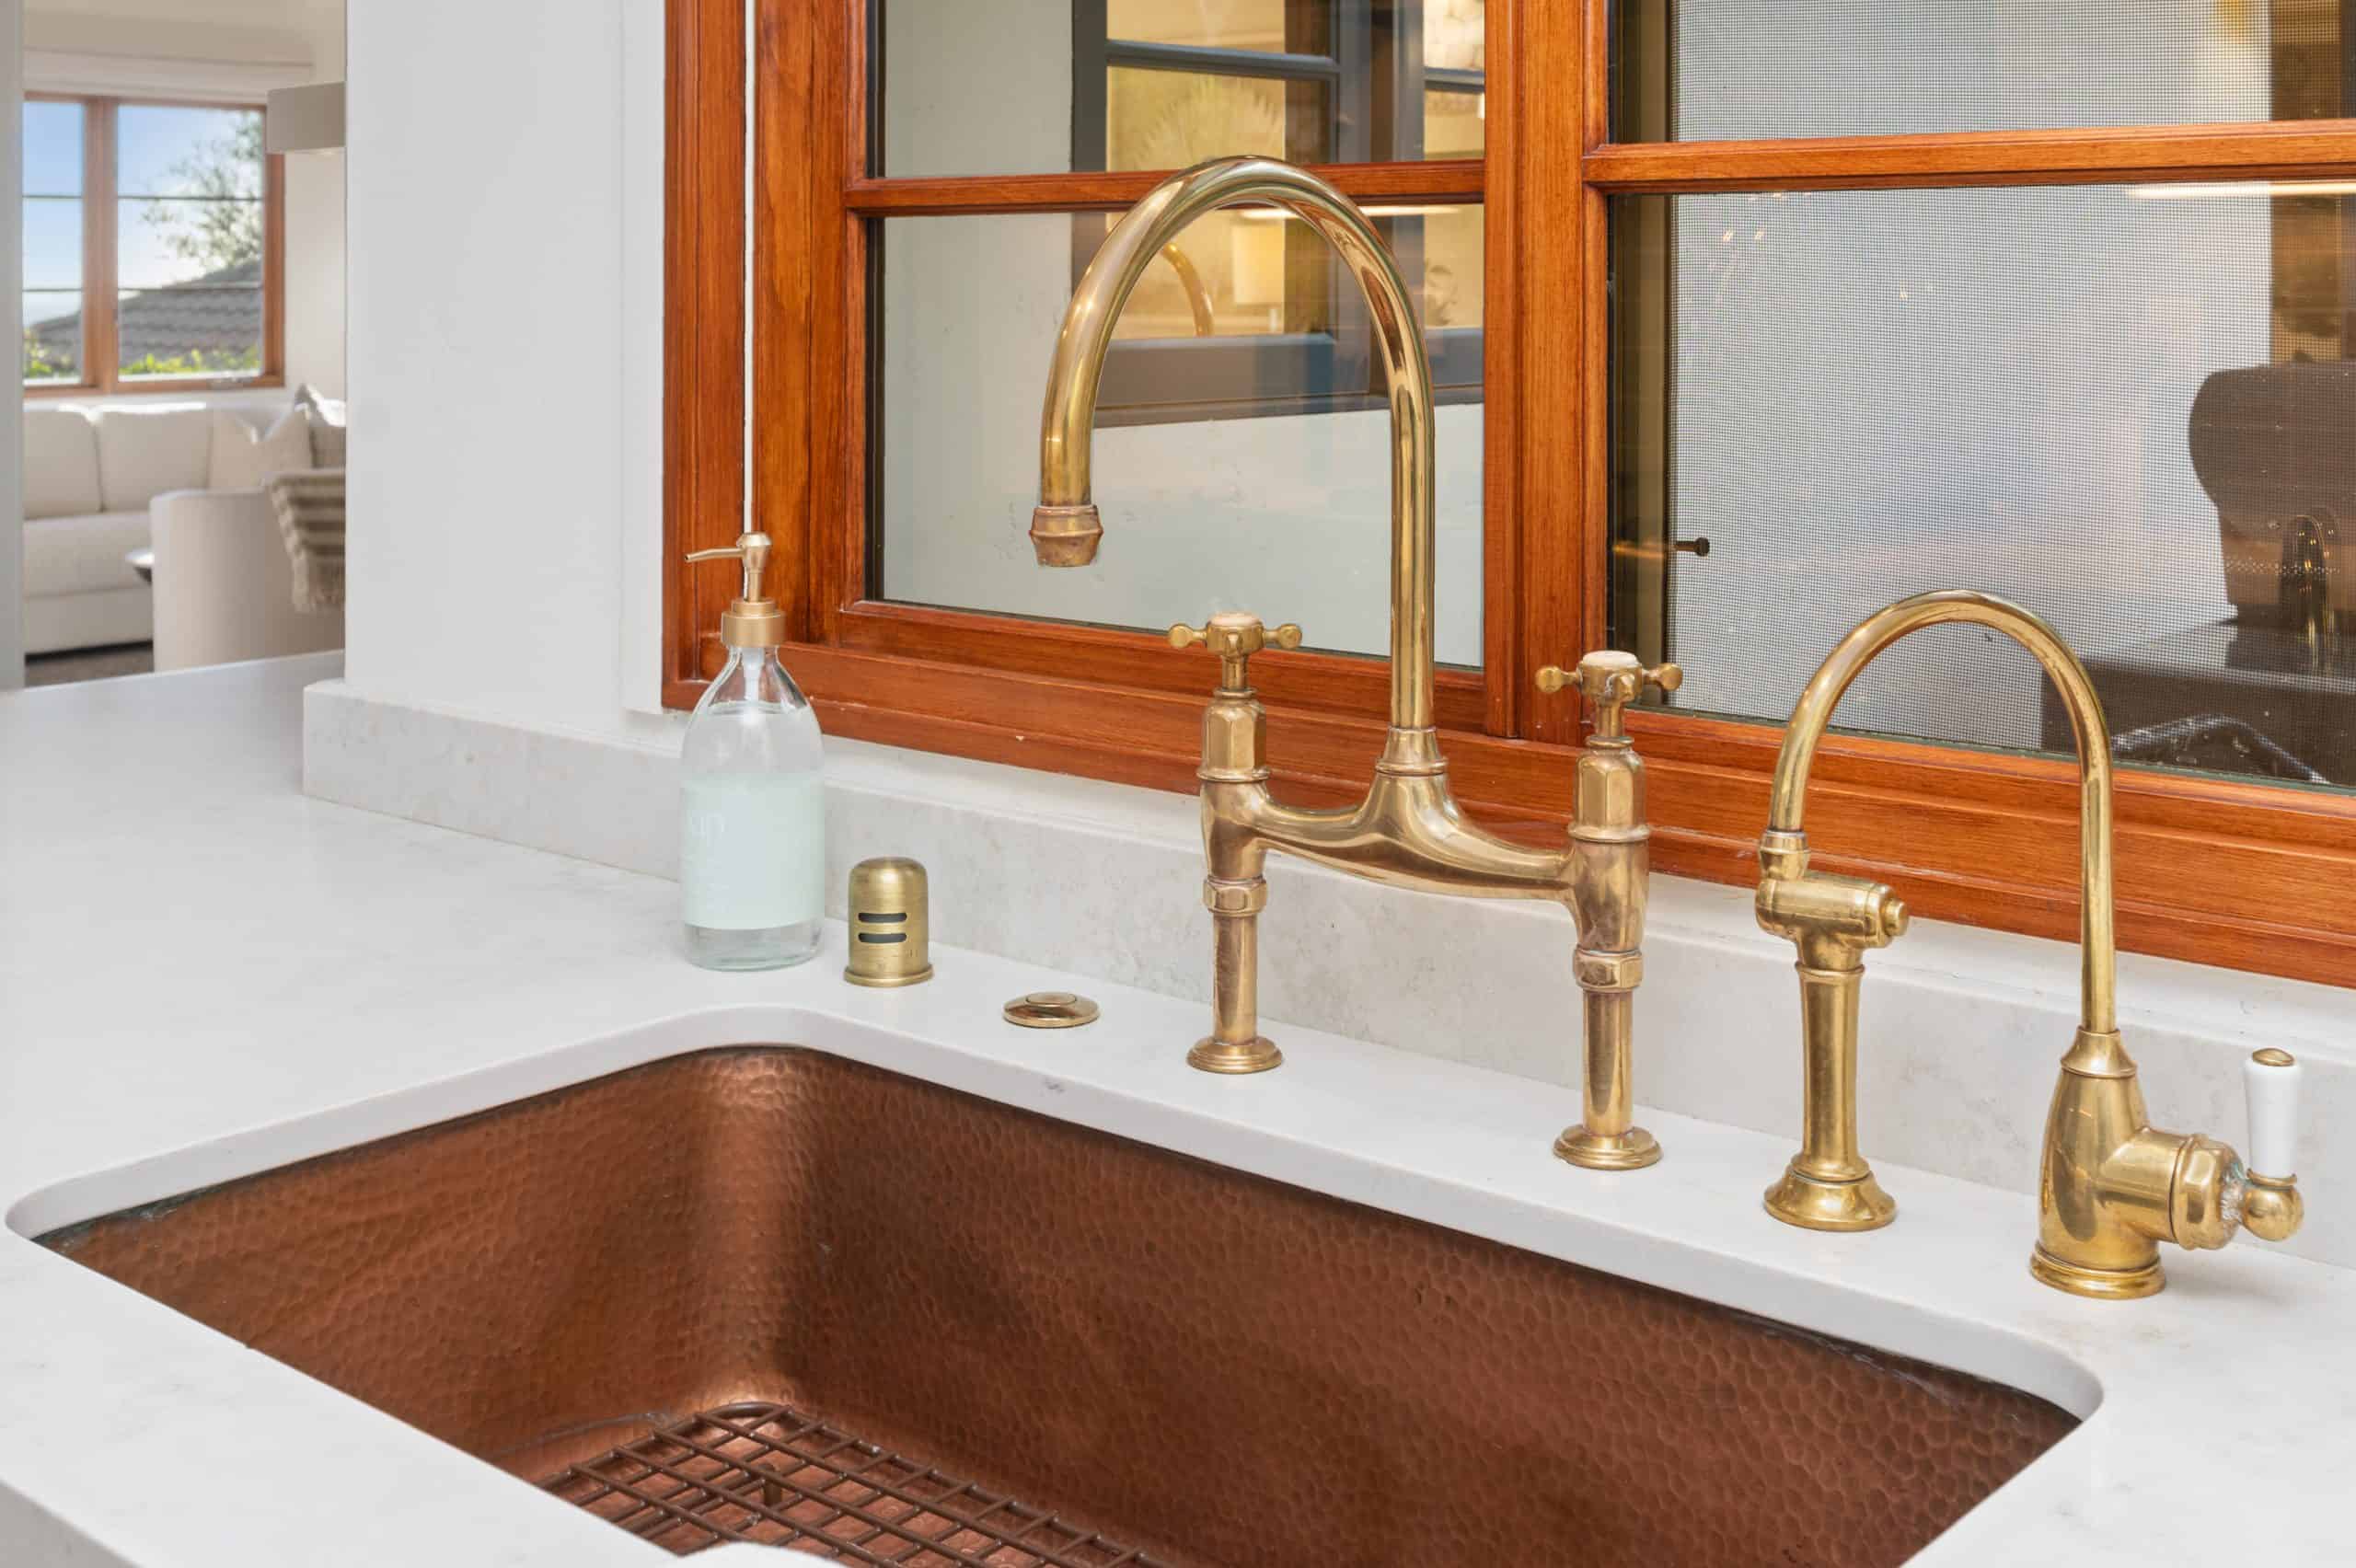 Self-cleaning copper sink